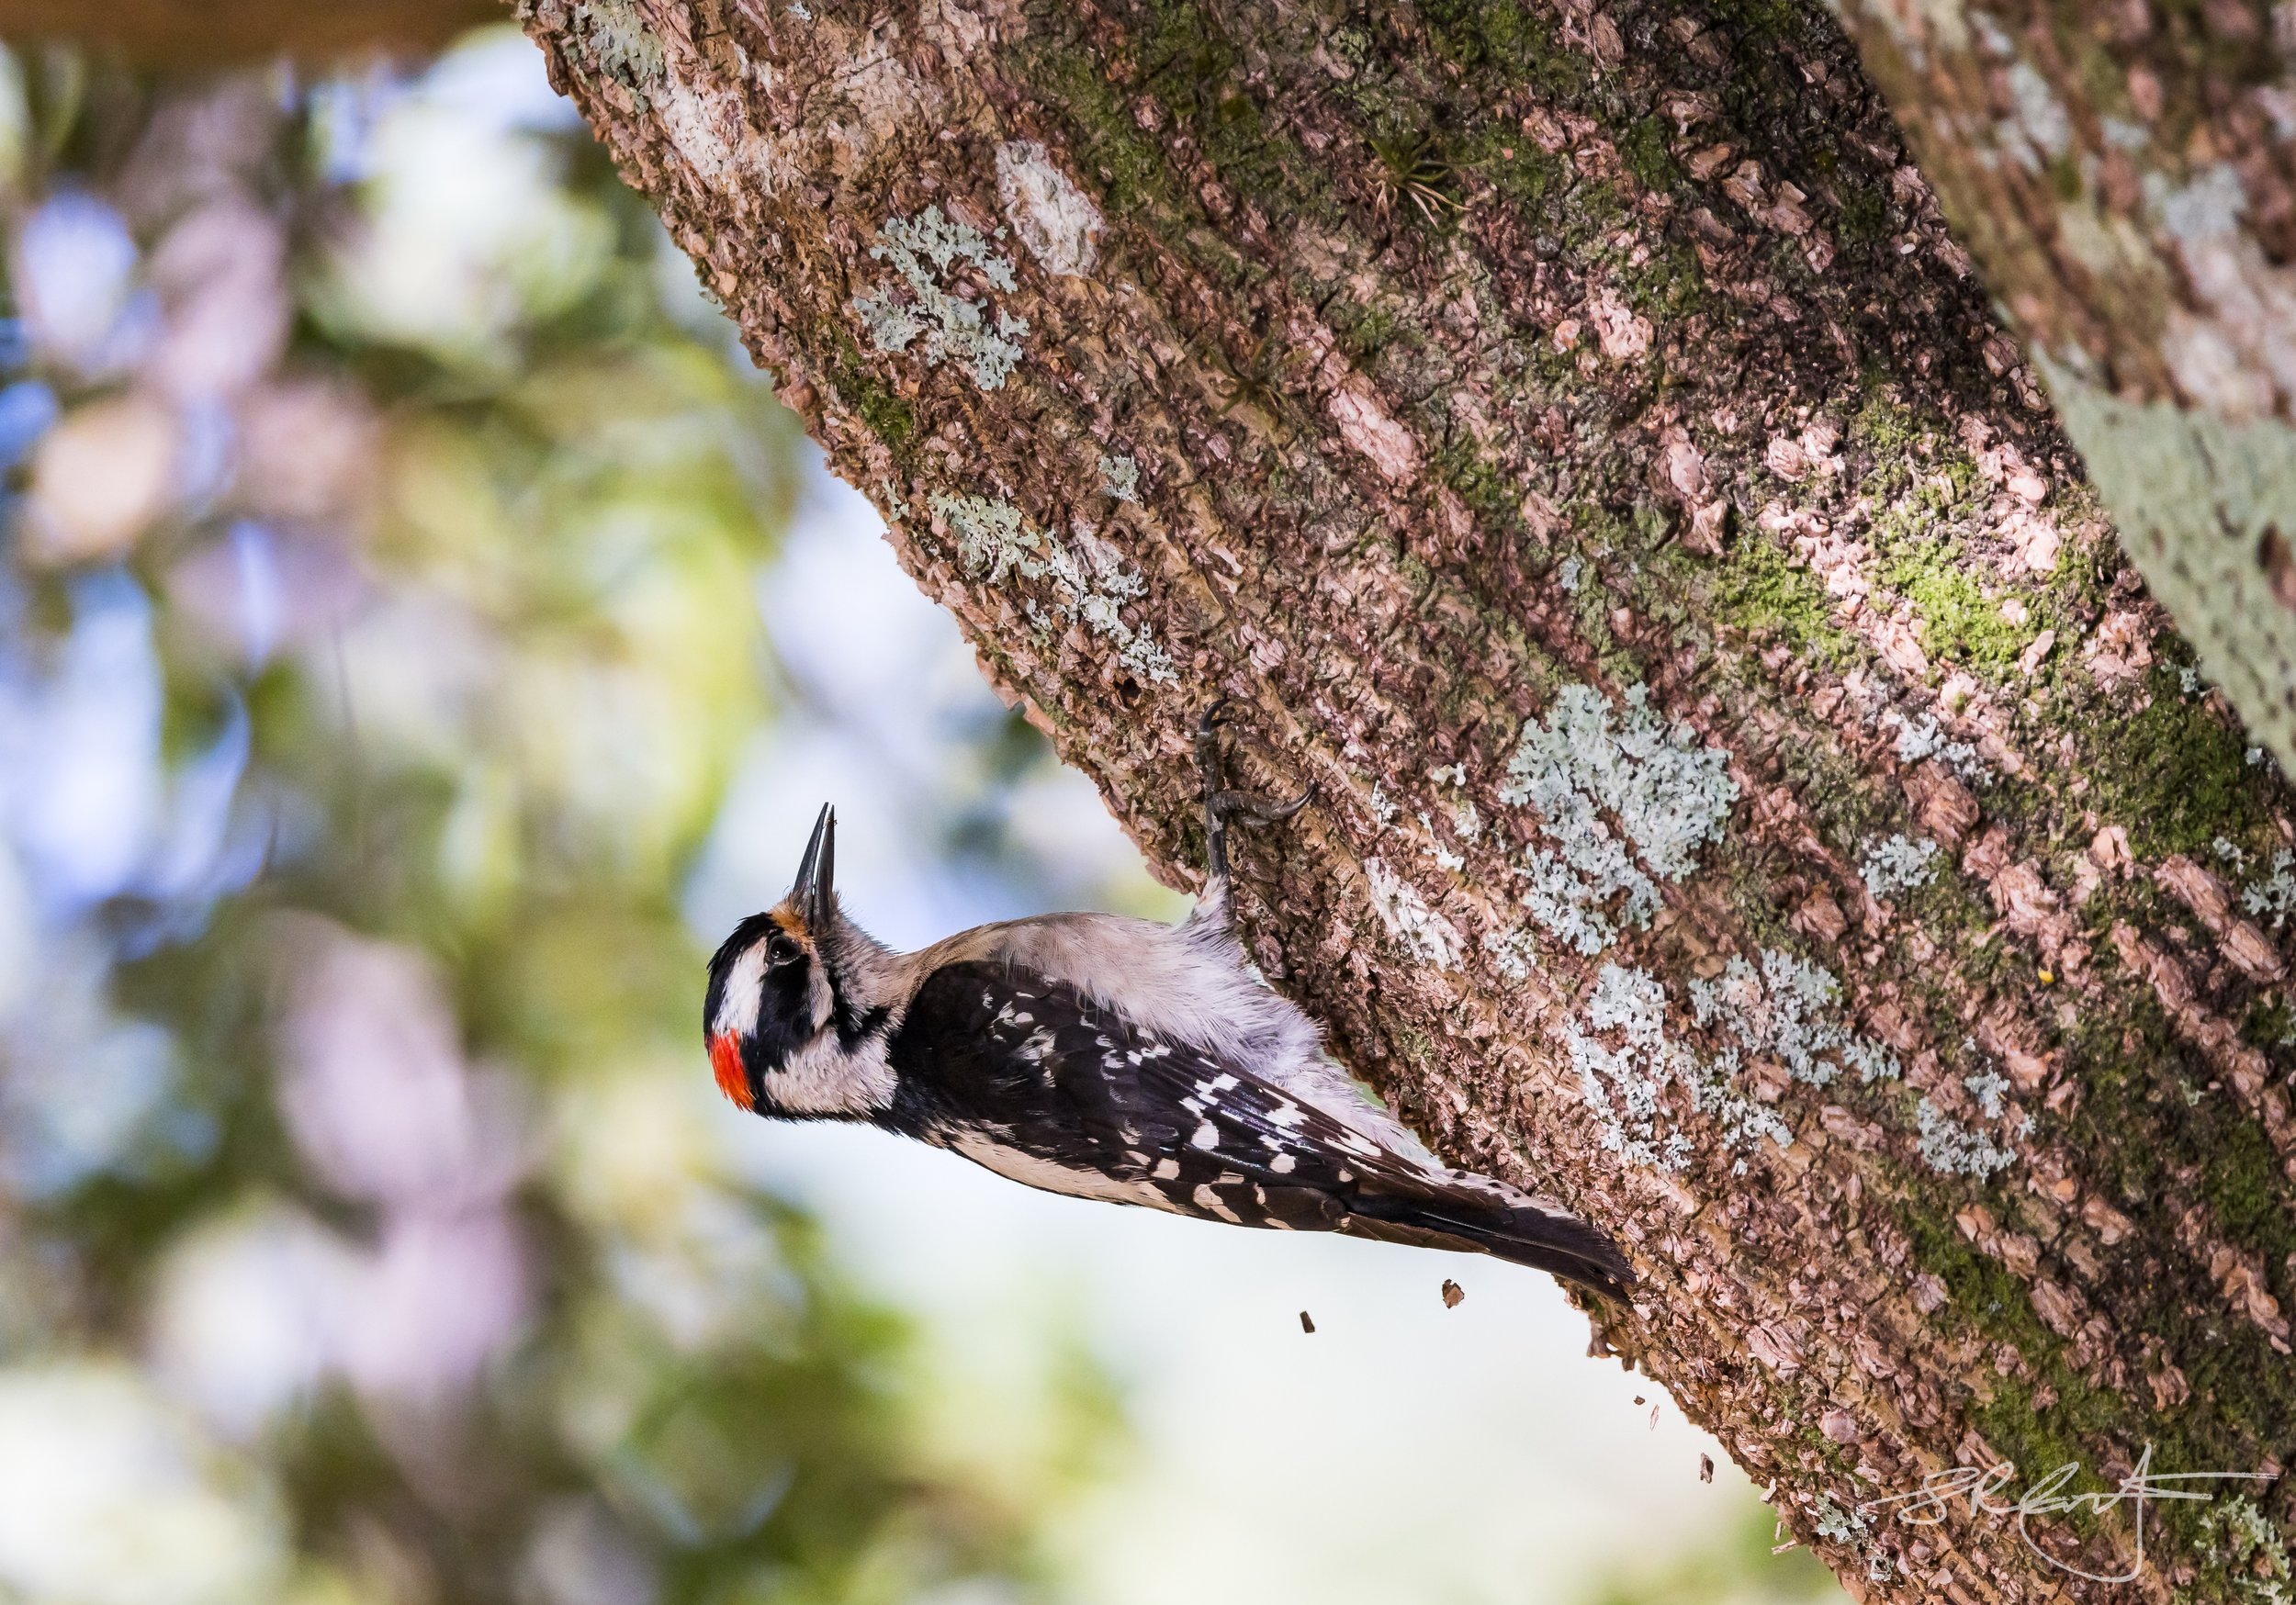 The acrobatic Downy Woodpecker